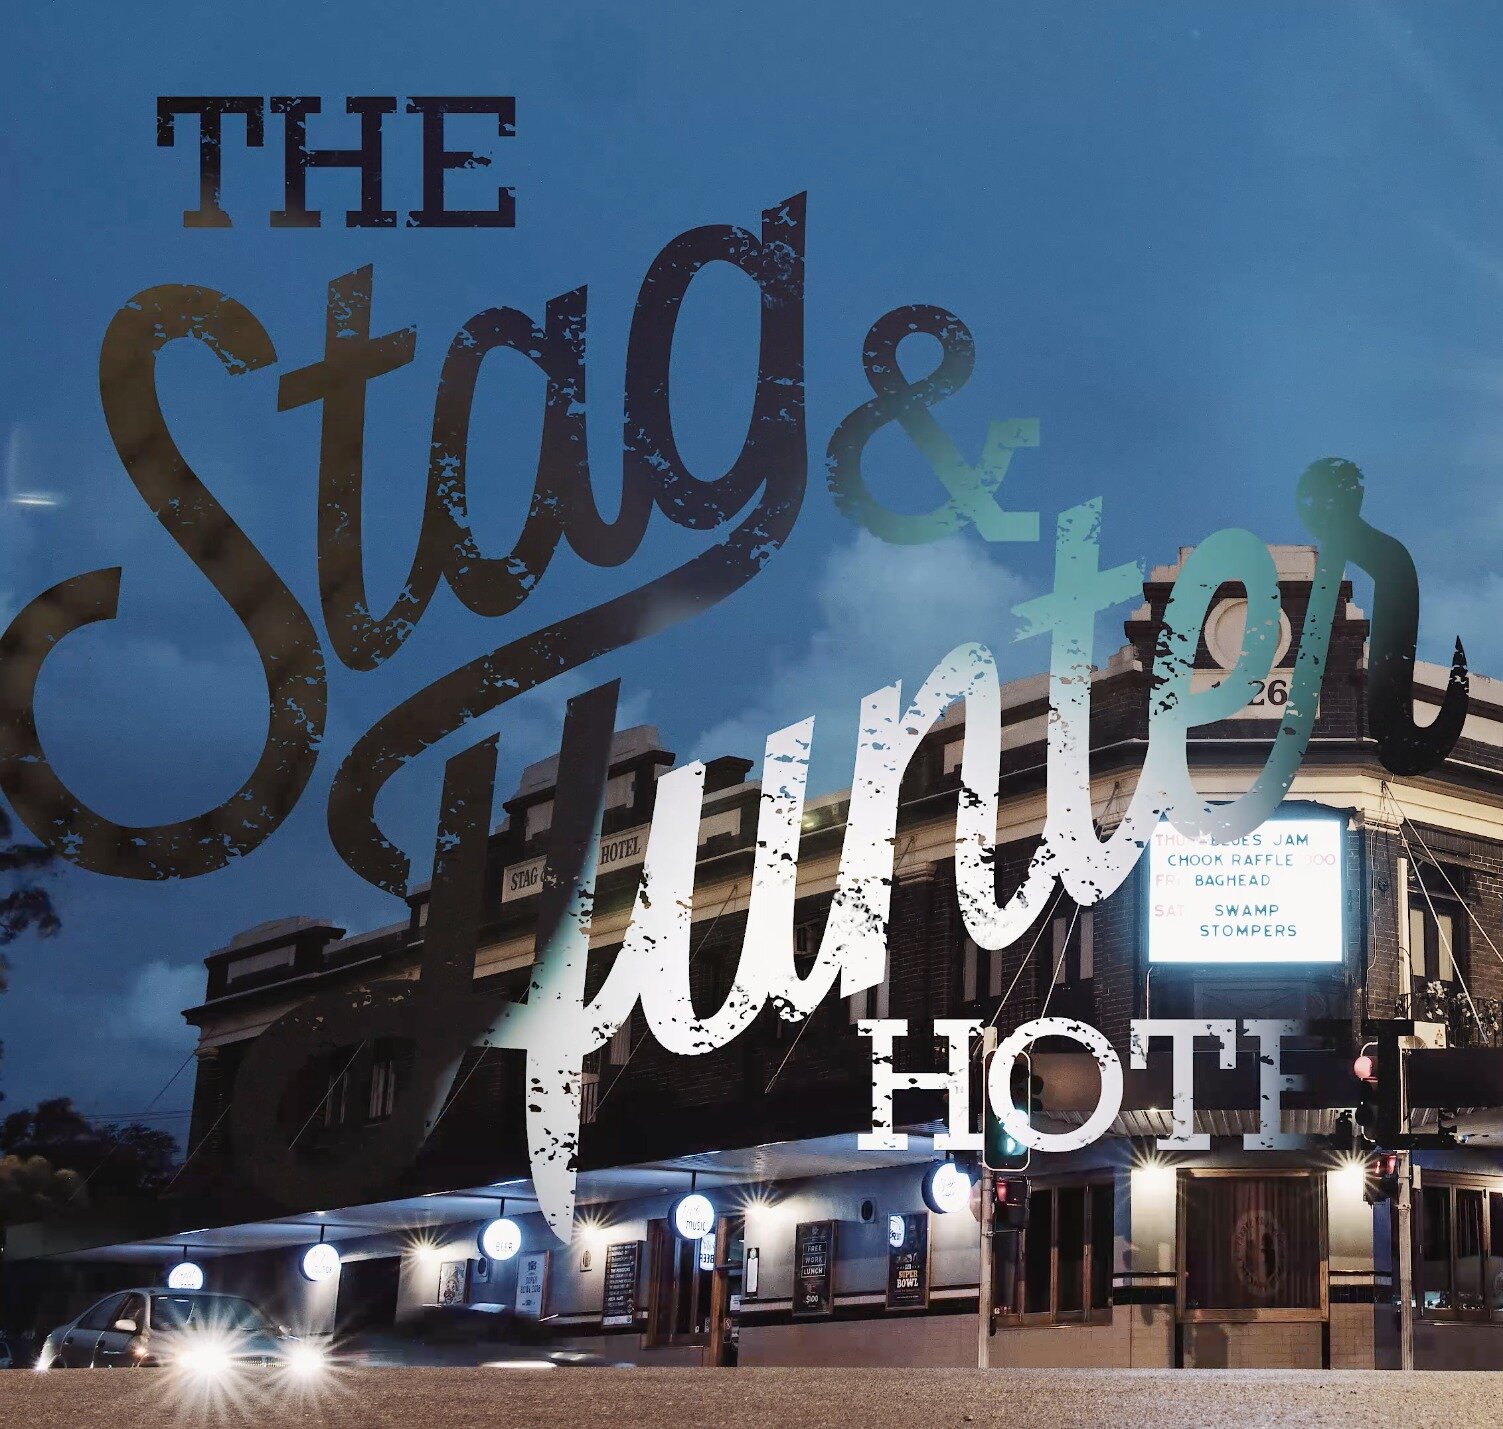 WHAT'S ON Entertainment this week #liveatthestagandhunter Newcastle

⭐️ TUES 5th: Music and Movie Trivia from 7pm - FREE

😂 WED 6th: PUNCHLINE COMEDY from *7:30pm - FREE

🎵 THUR 7th: Merewether Fats Blues Jam - FREE ENTRY 

🎵 FRI 8th: Great Southe